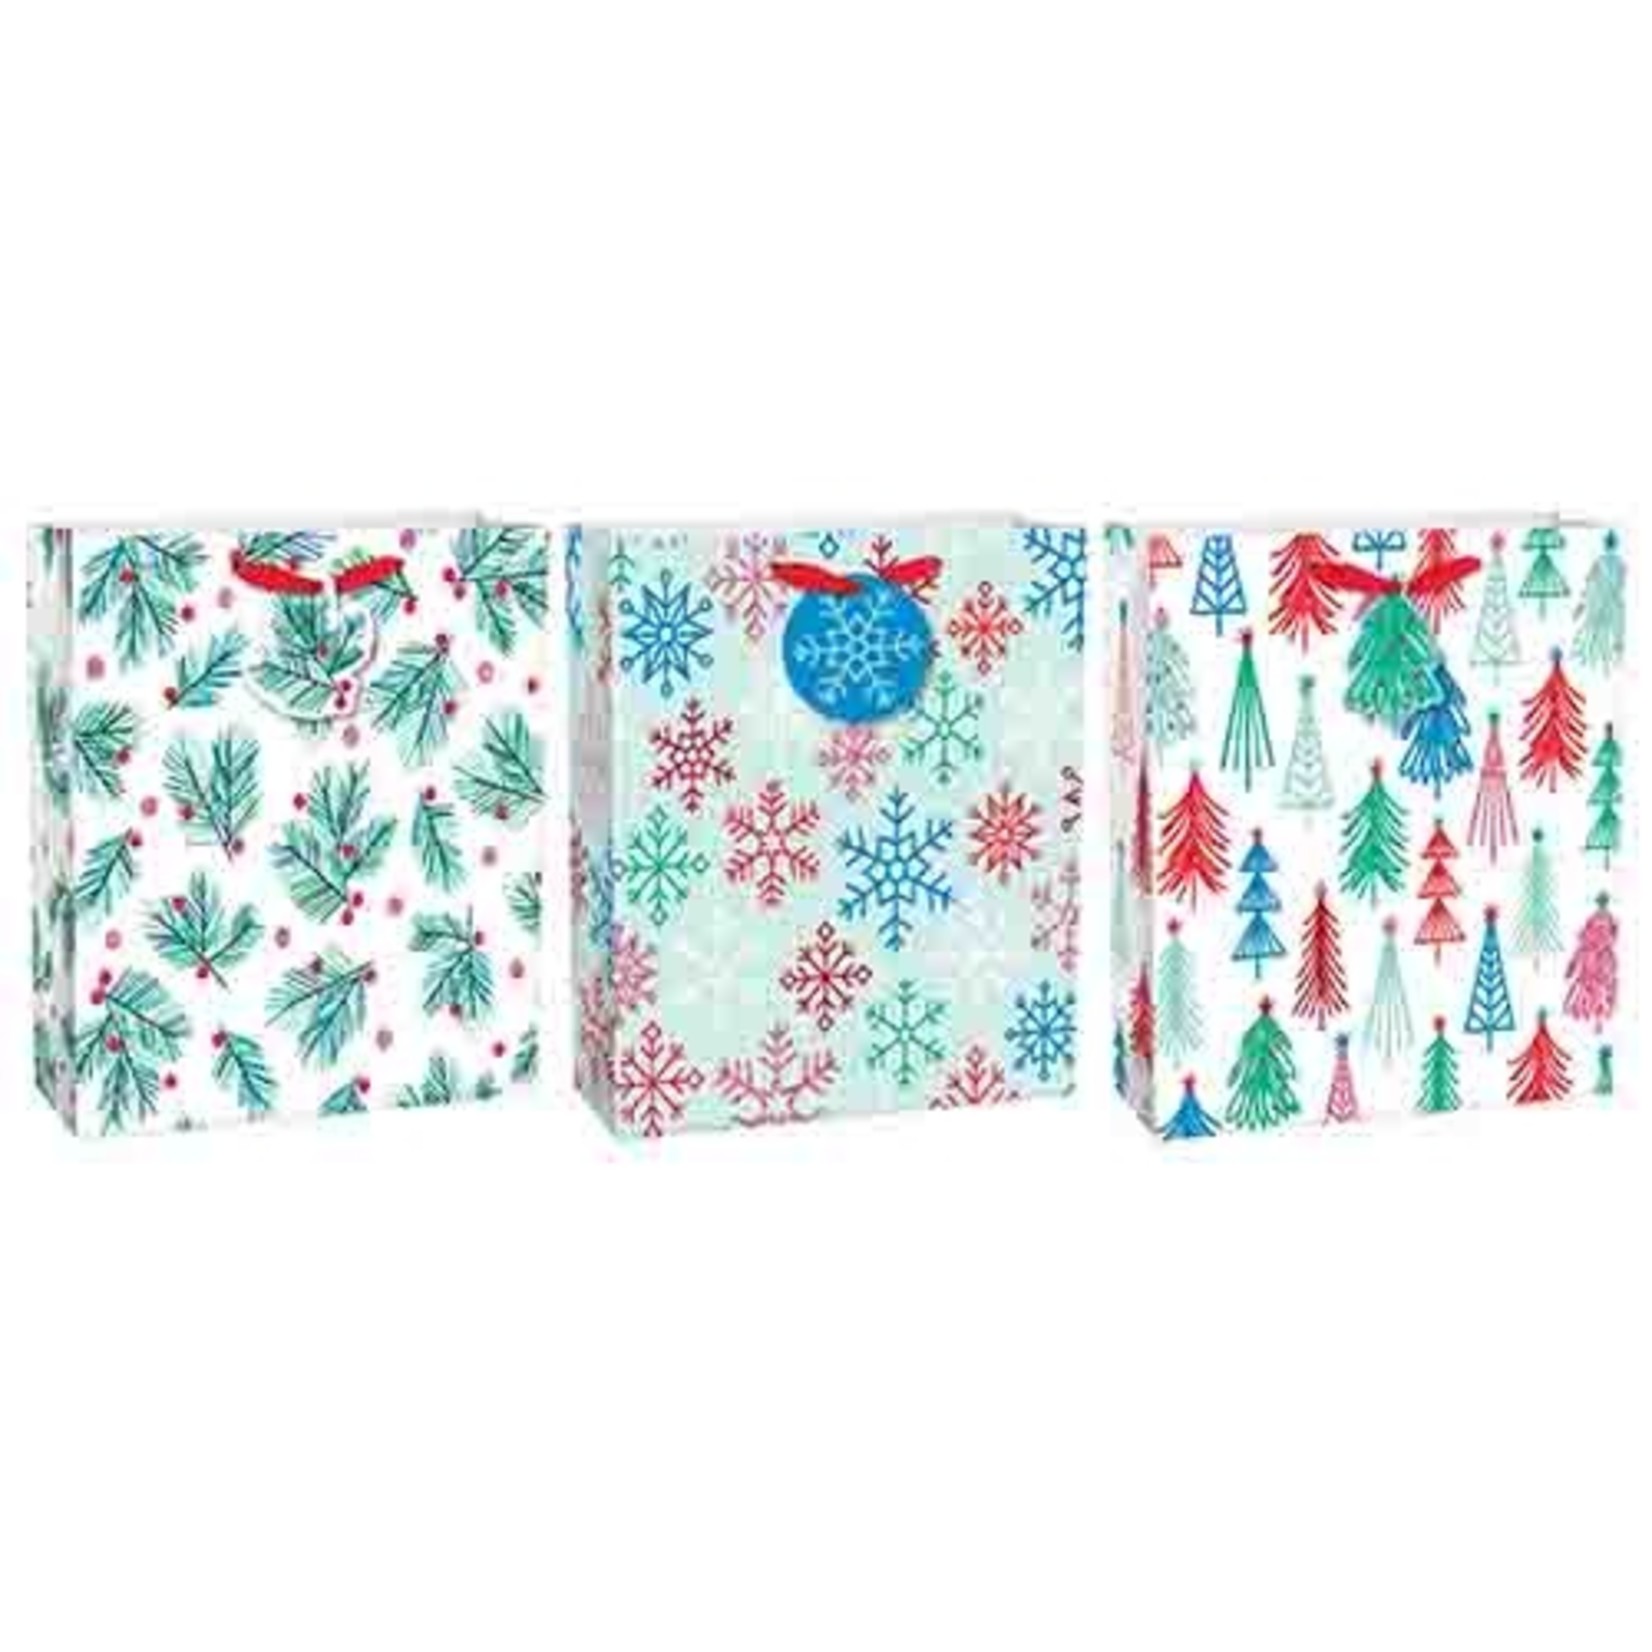 Amscan Holly, Tree & Snowflake Large Gift Bags - 3ct. Multi-Pack